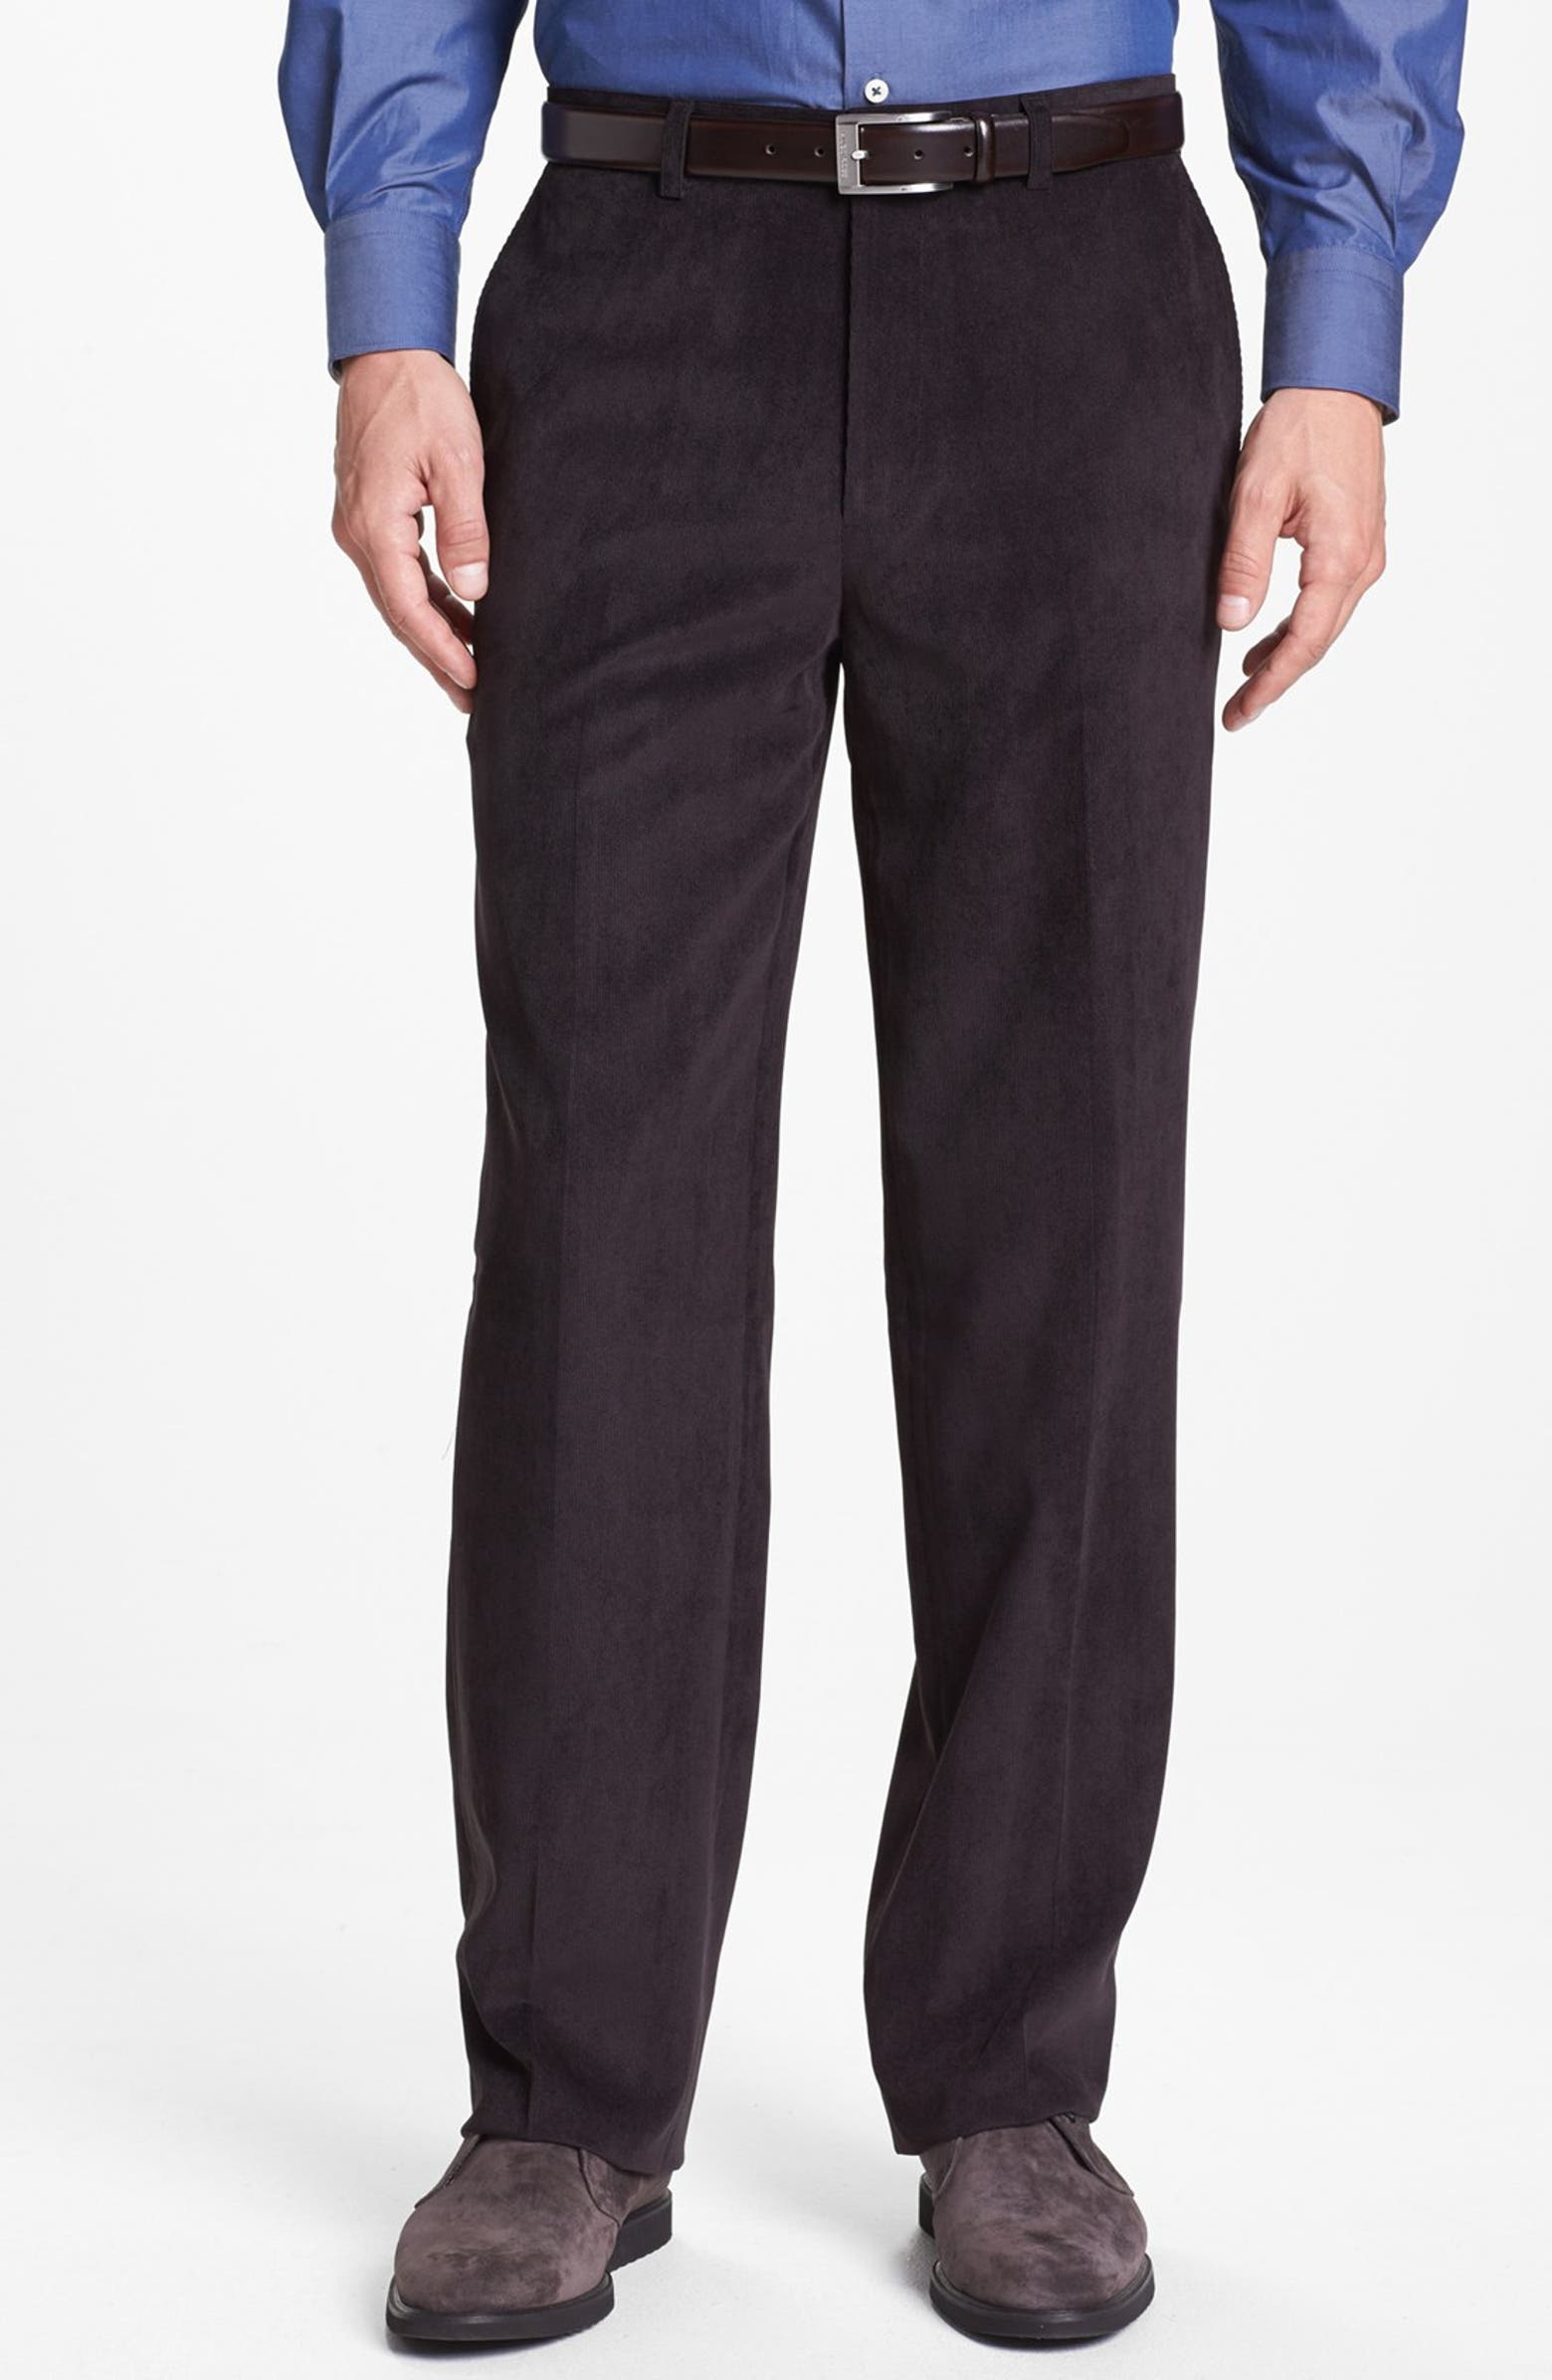 Linea Naturale 'Micro-Aire' Flat Front Corduroy Trousers | Nordstrom